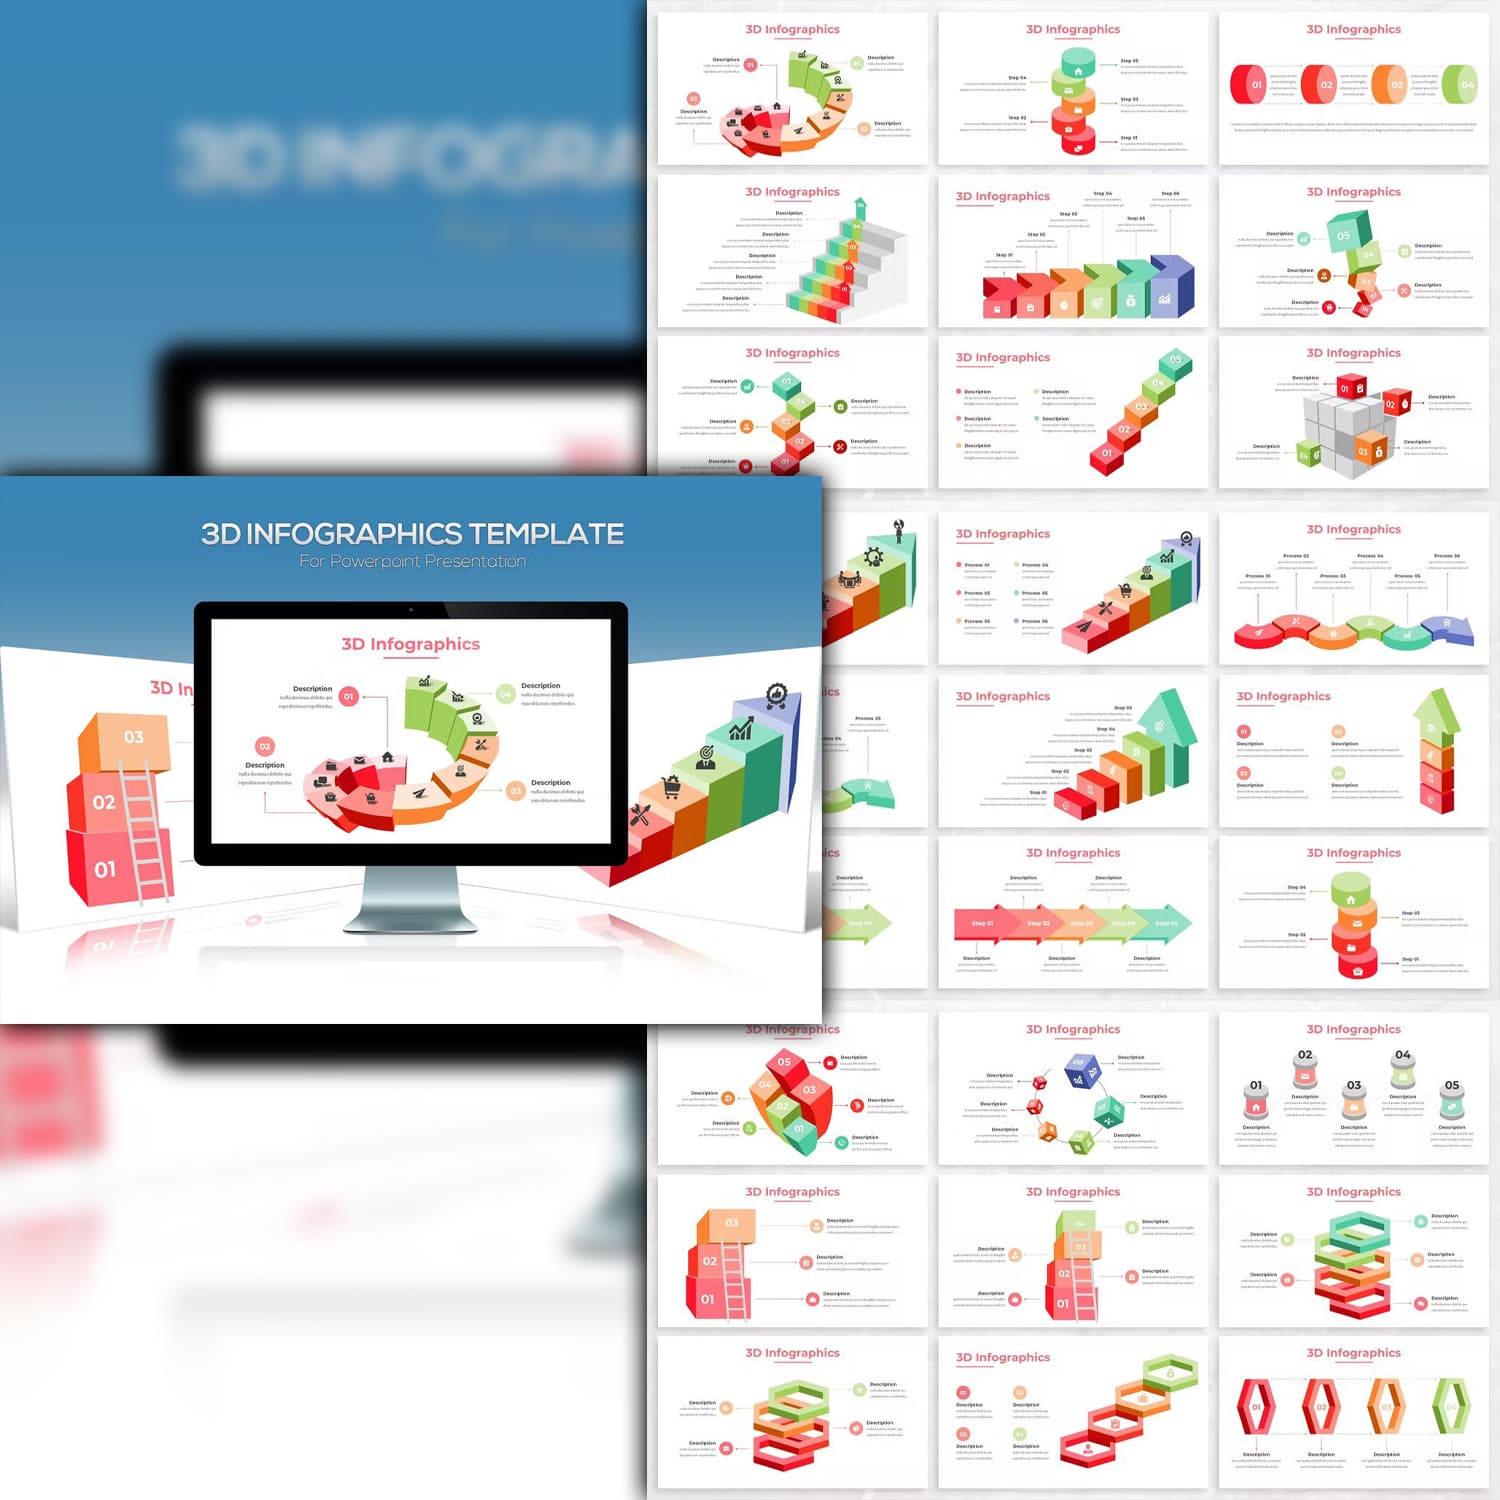 3d infographics for powerpoint presentation from SlideFactory.